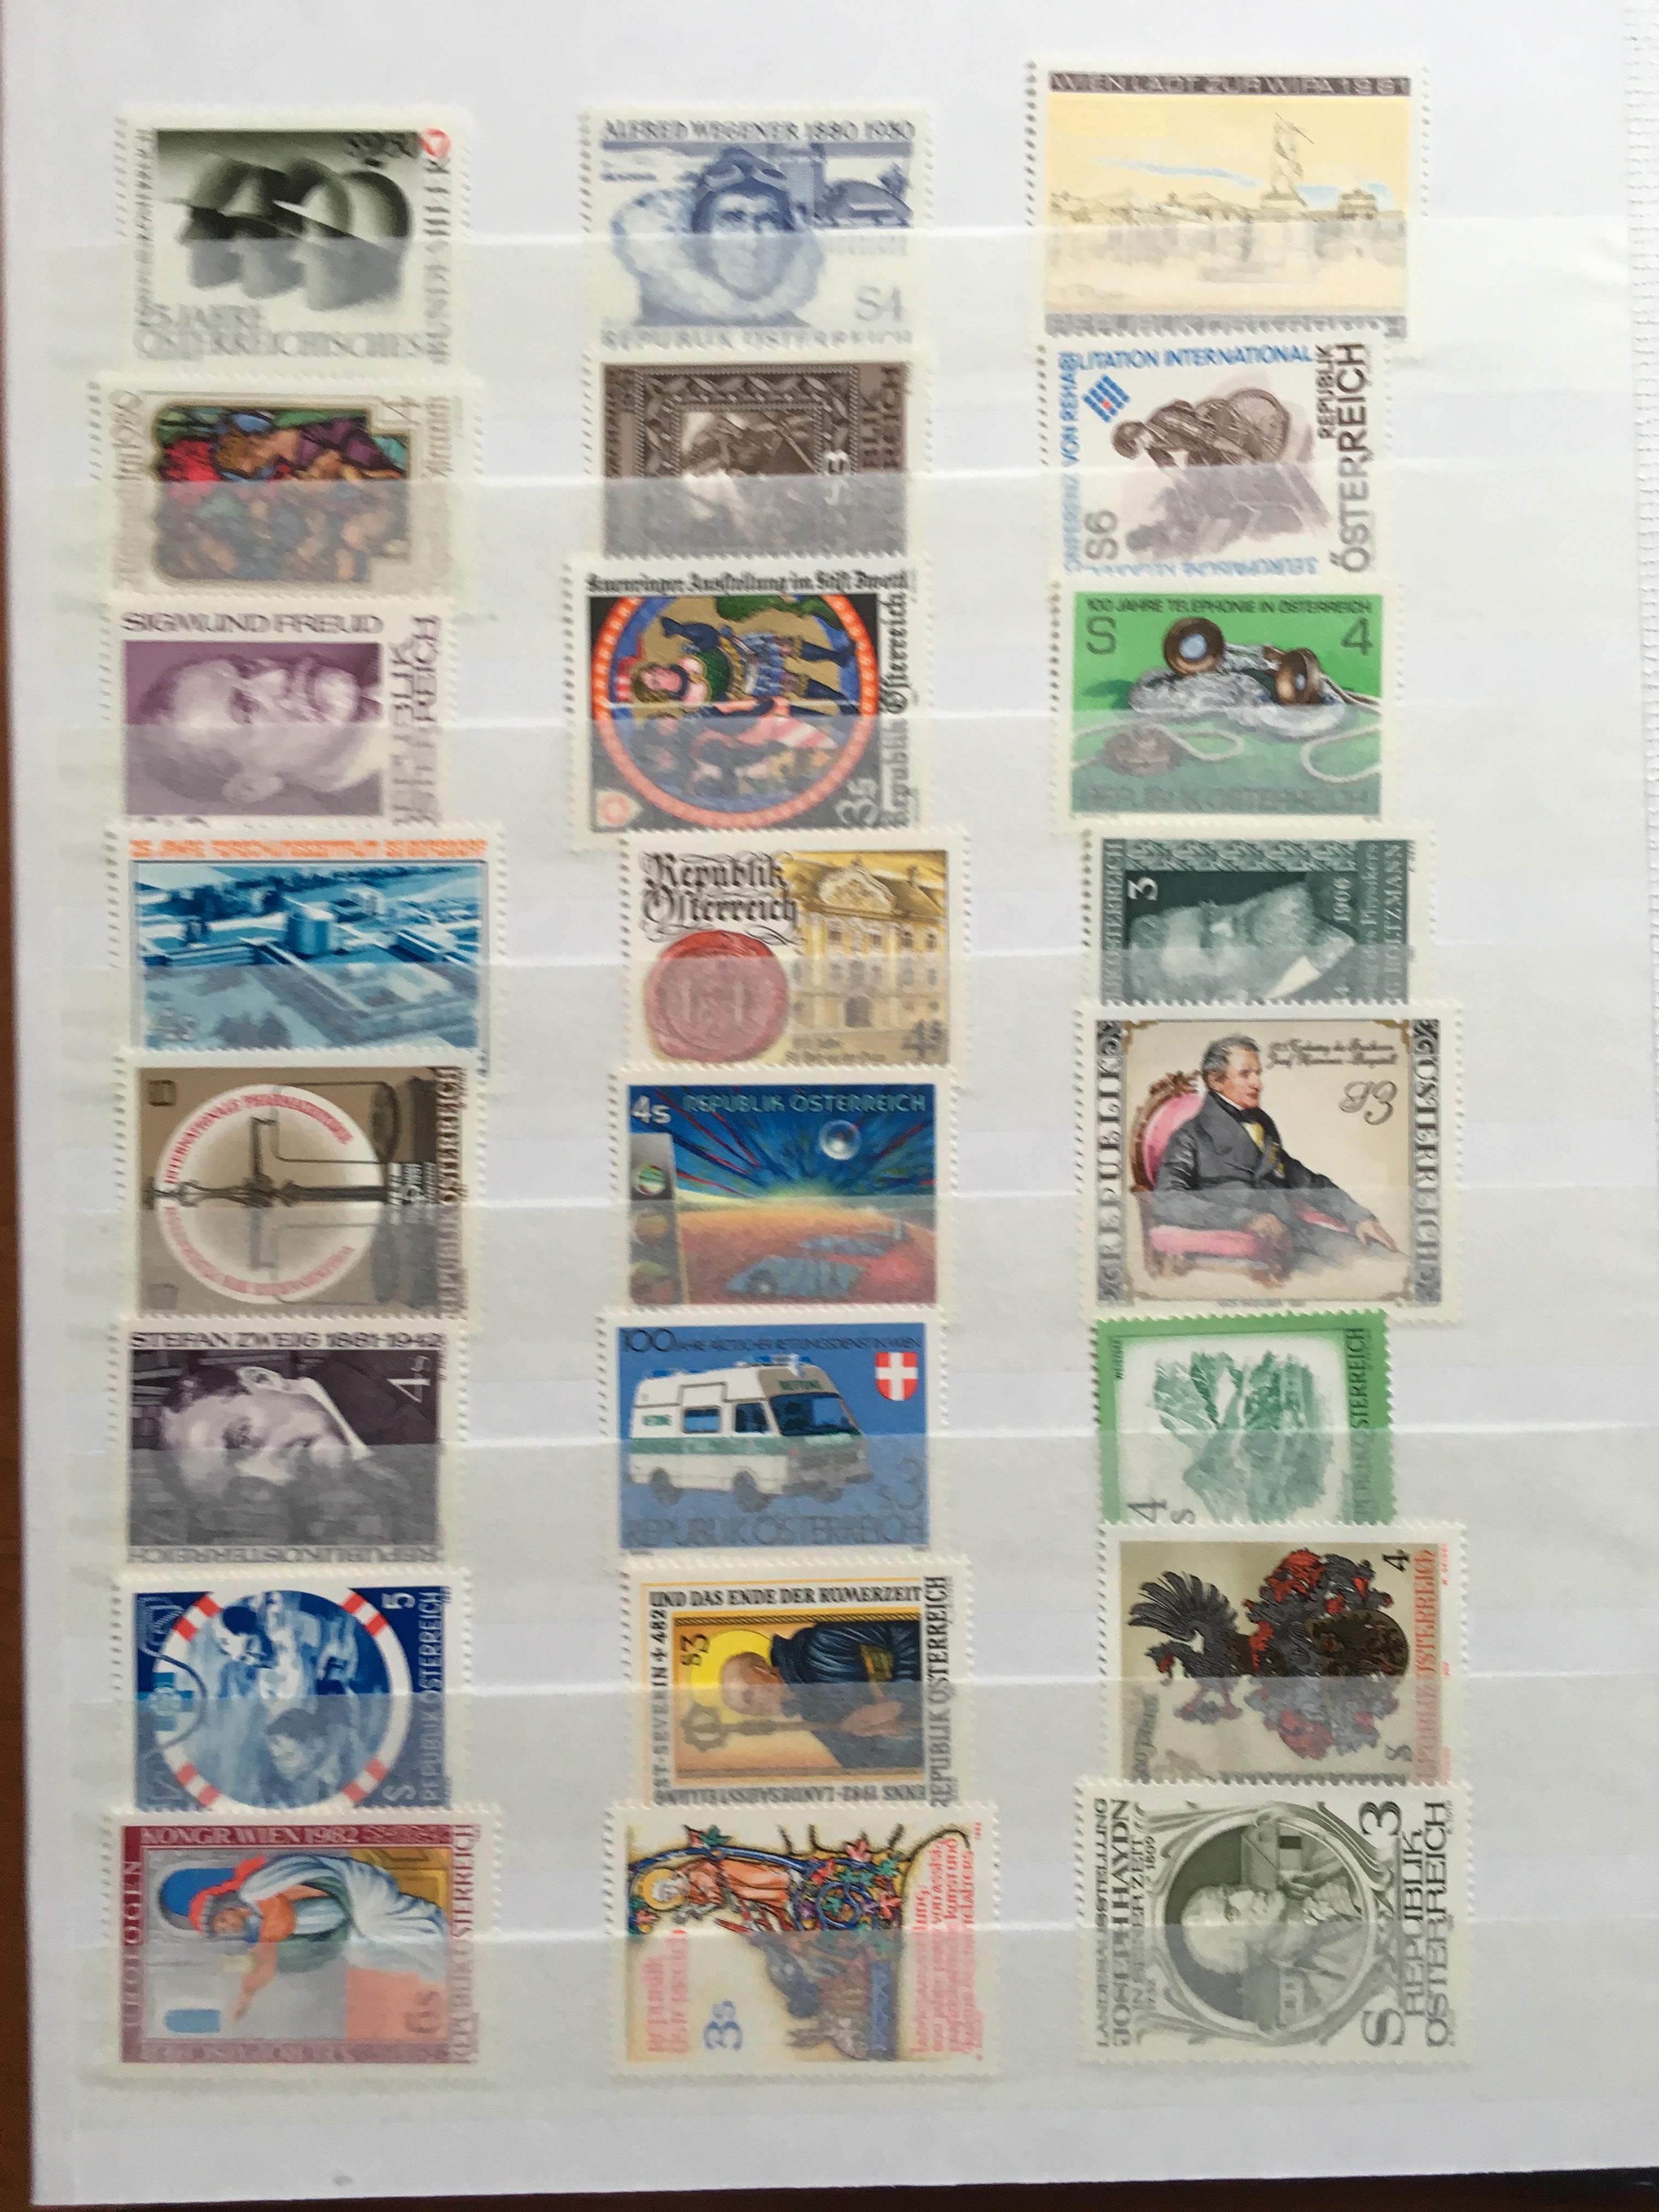 STAMPS: EUROPEAN IN EIGHT VOLUMES, FRANCE, LUXEMBOURG, NORWAY, NETHERLANDS, MINT RUSSIA, - Image 23 of 32